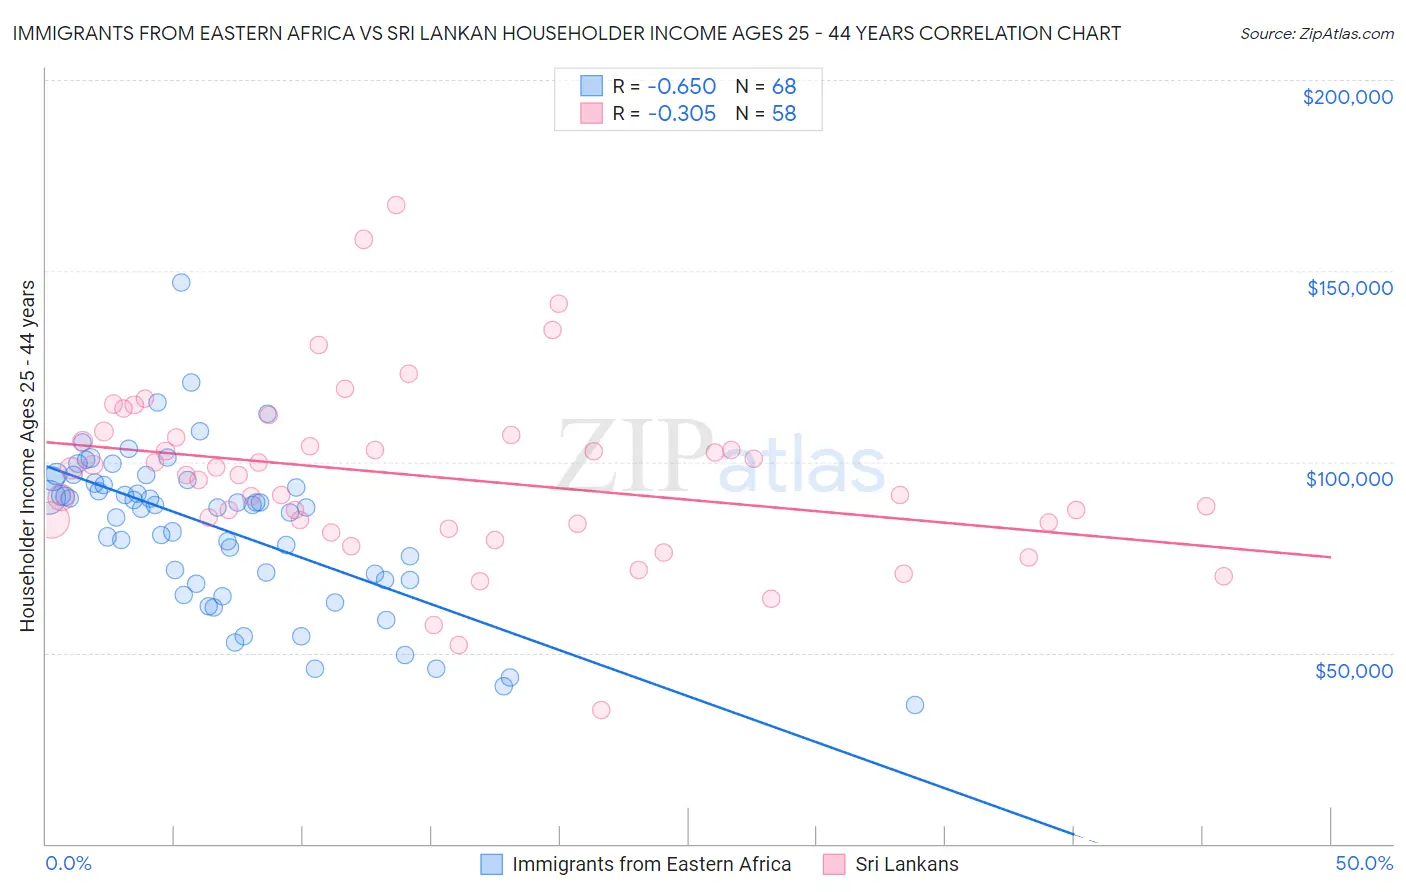 Immigrants from Eastern Africa vs Sri Lankan Householder Income Ages 25 - 44 years